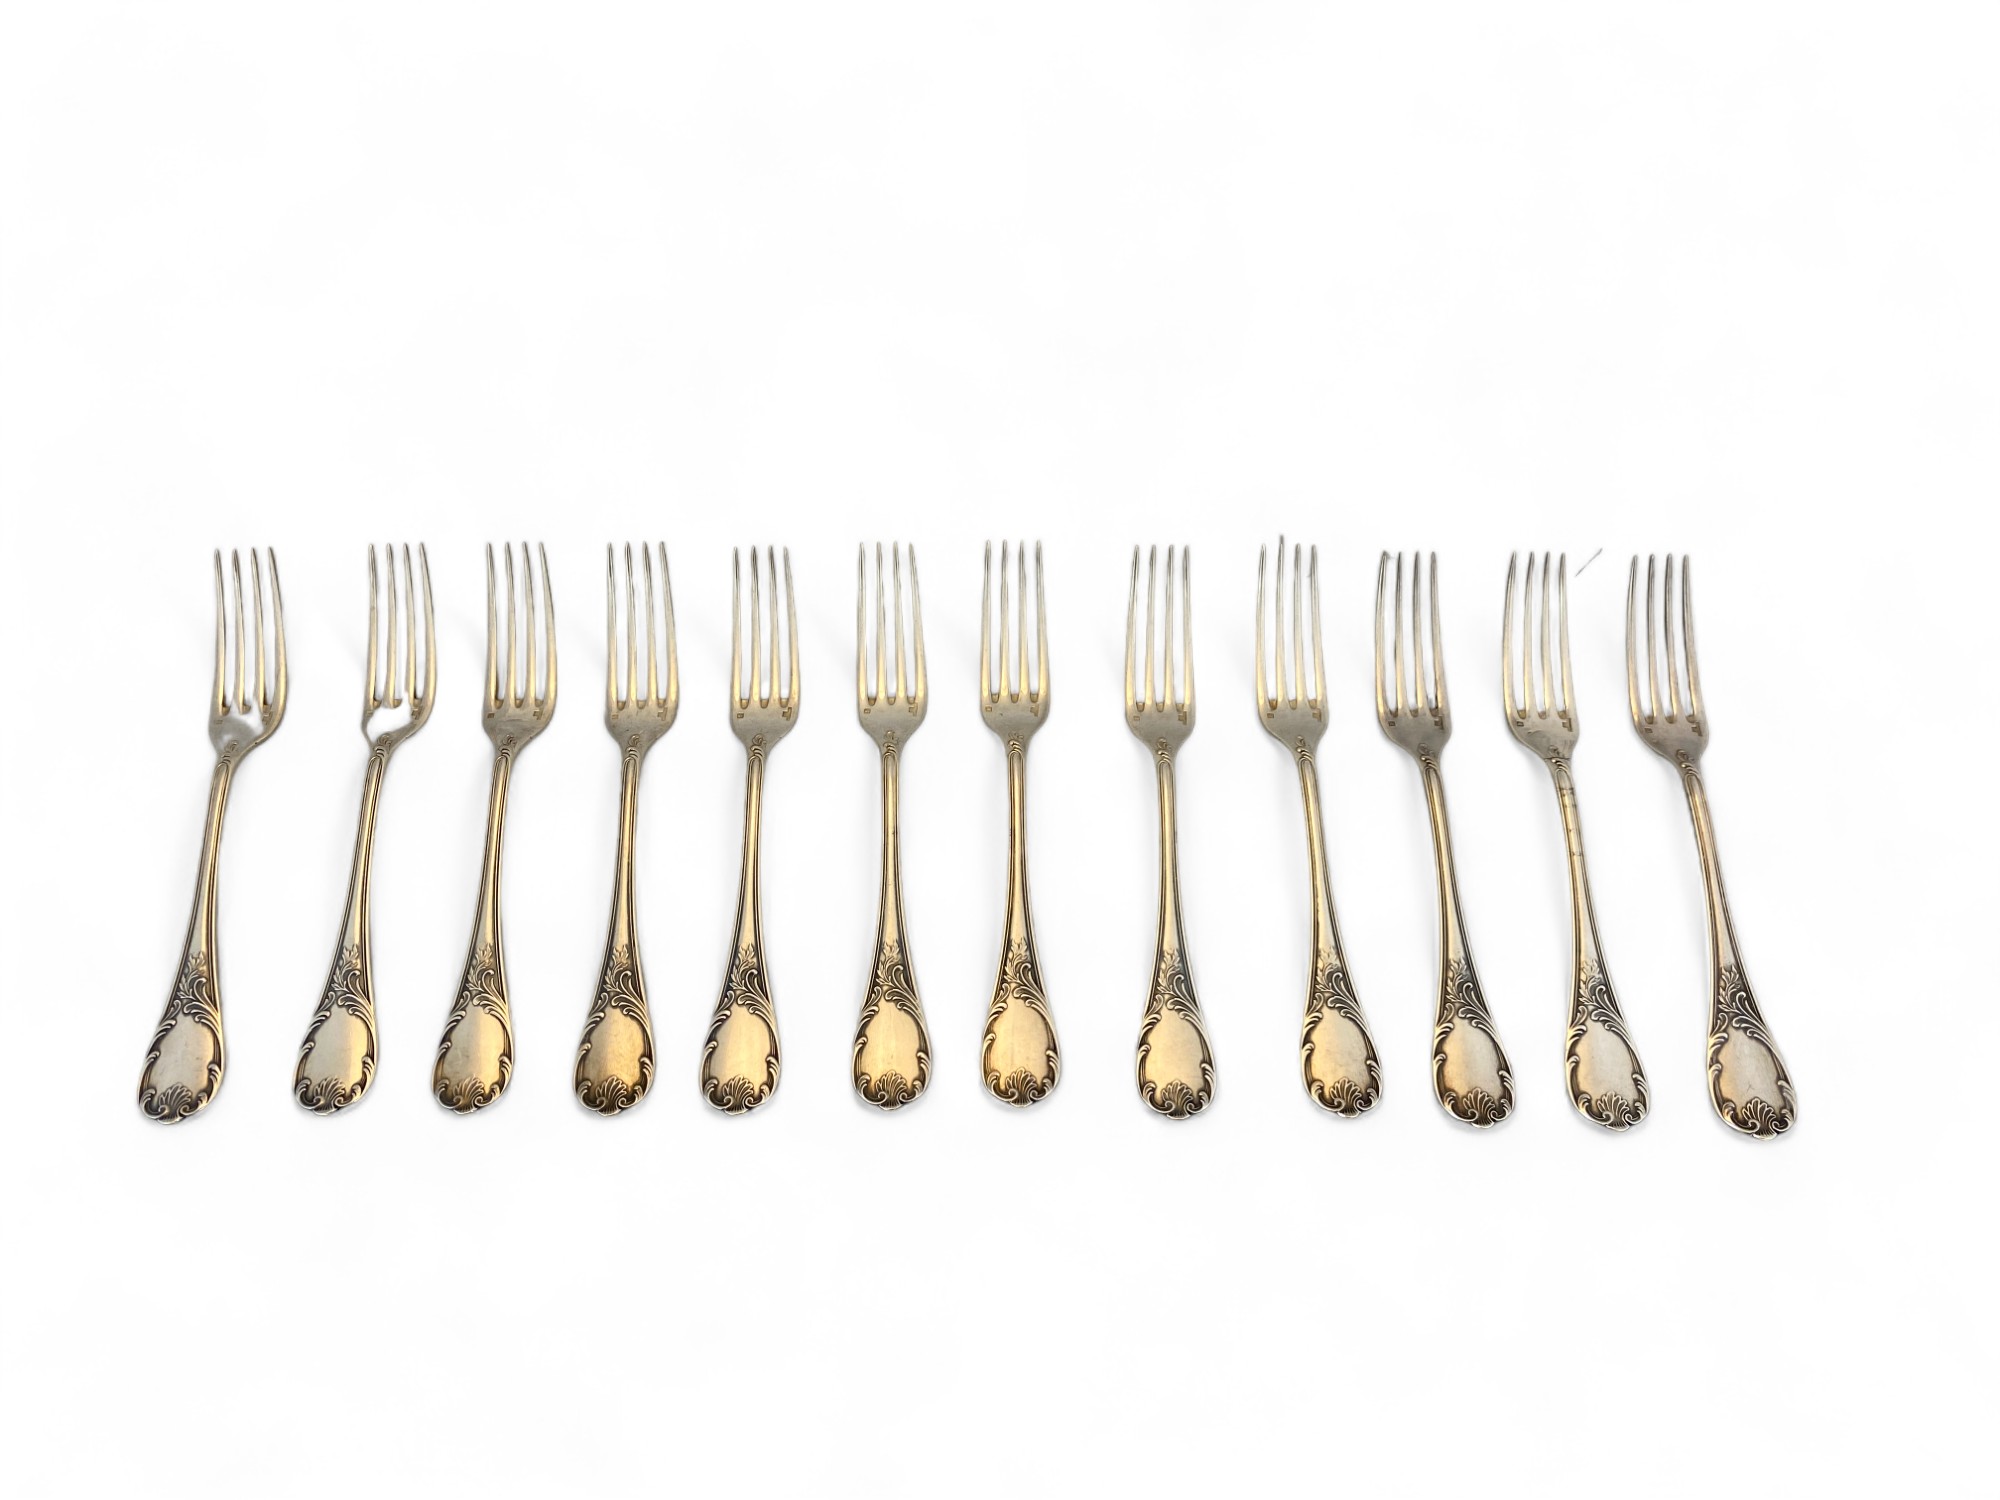 An extensive composite canteen of mostly silver plated Marly pattern cutlery by Christofle, Paris - Image 15 of 99